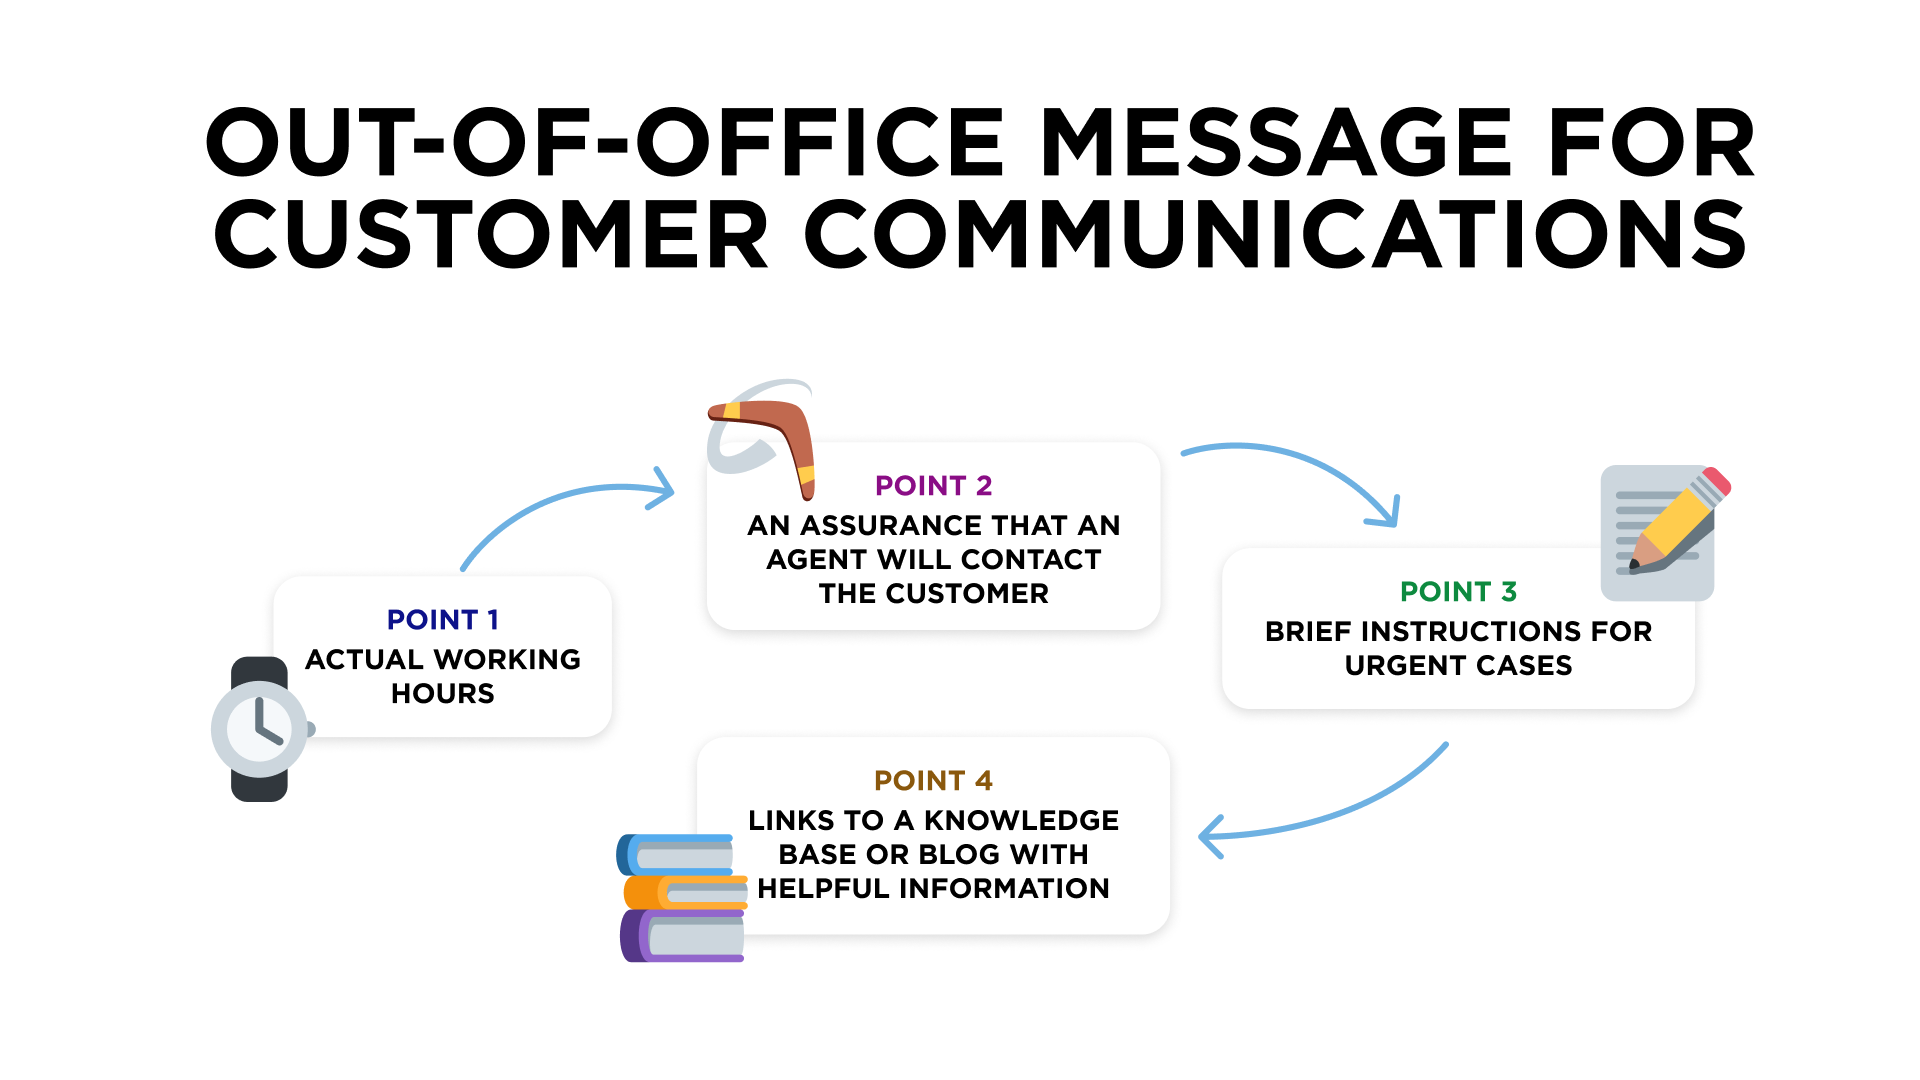 Out-of-office message for customer communication